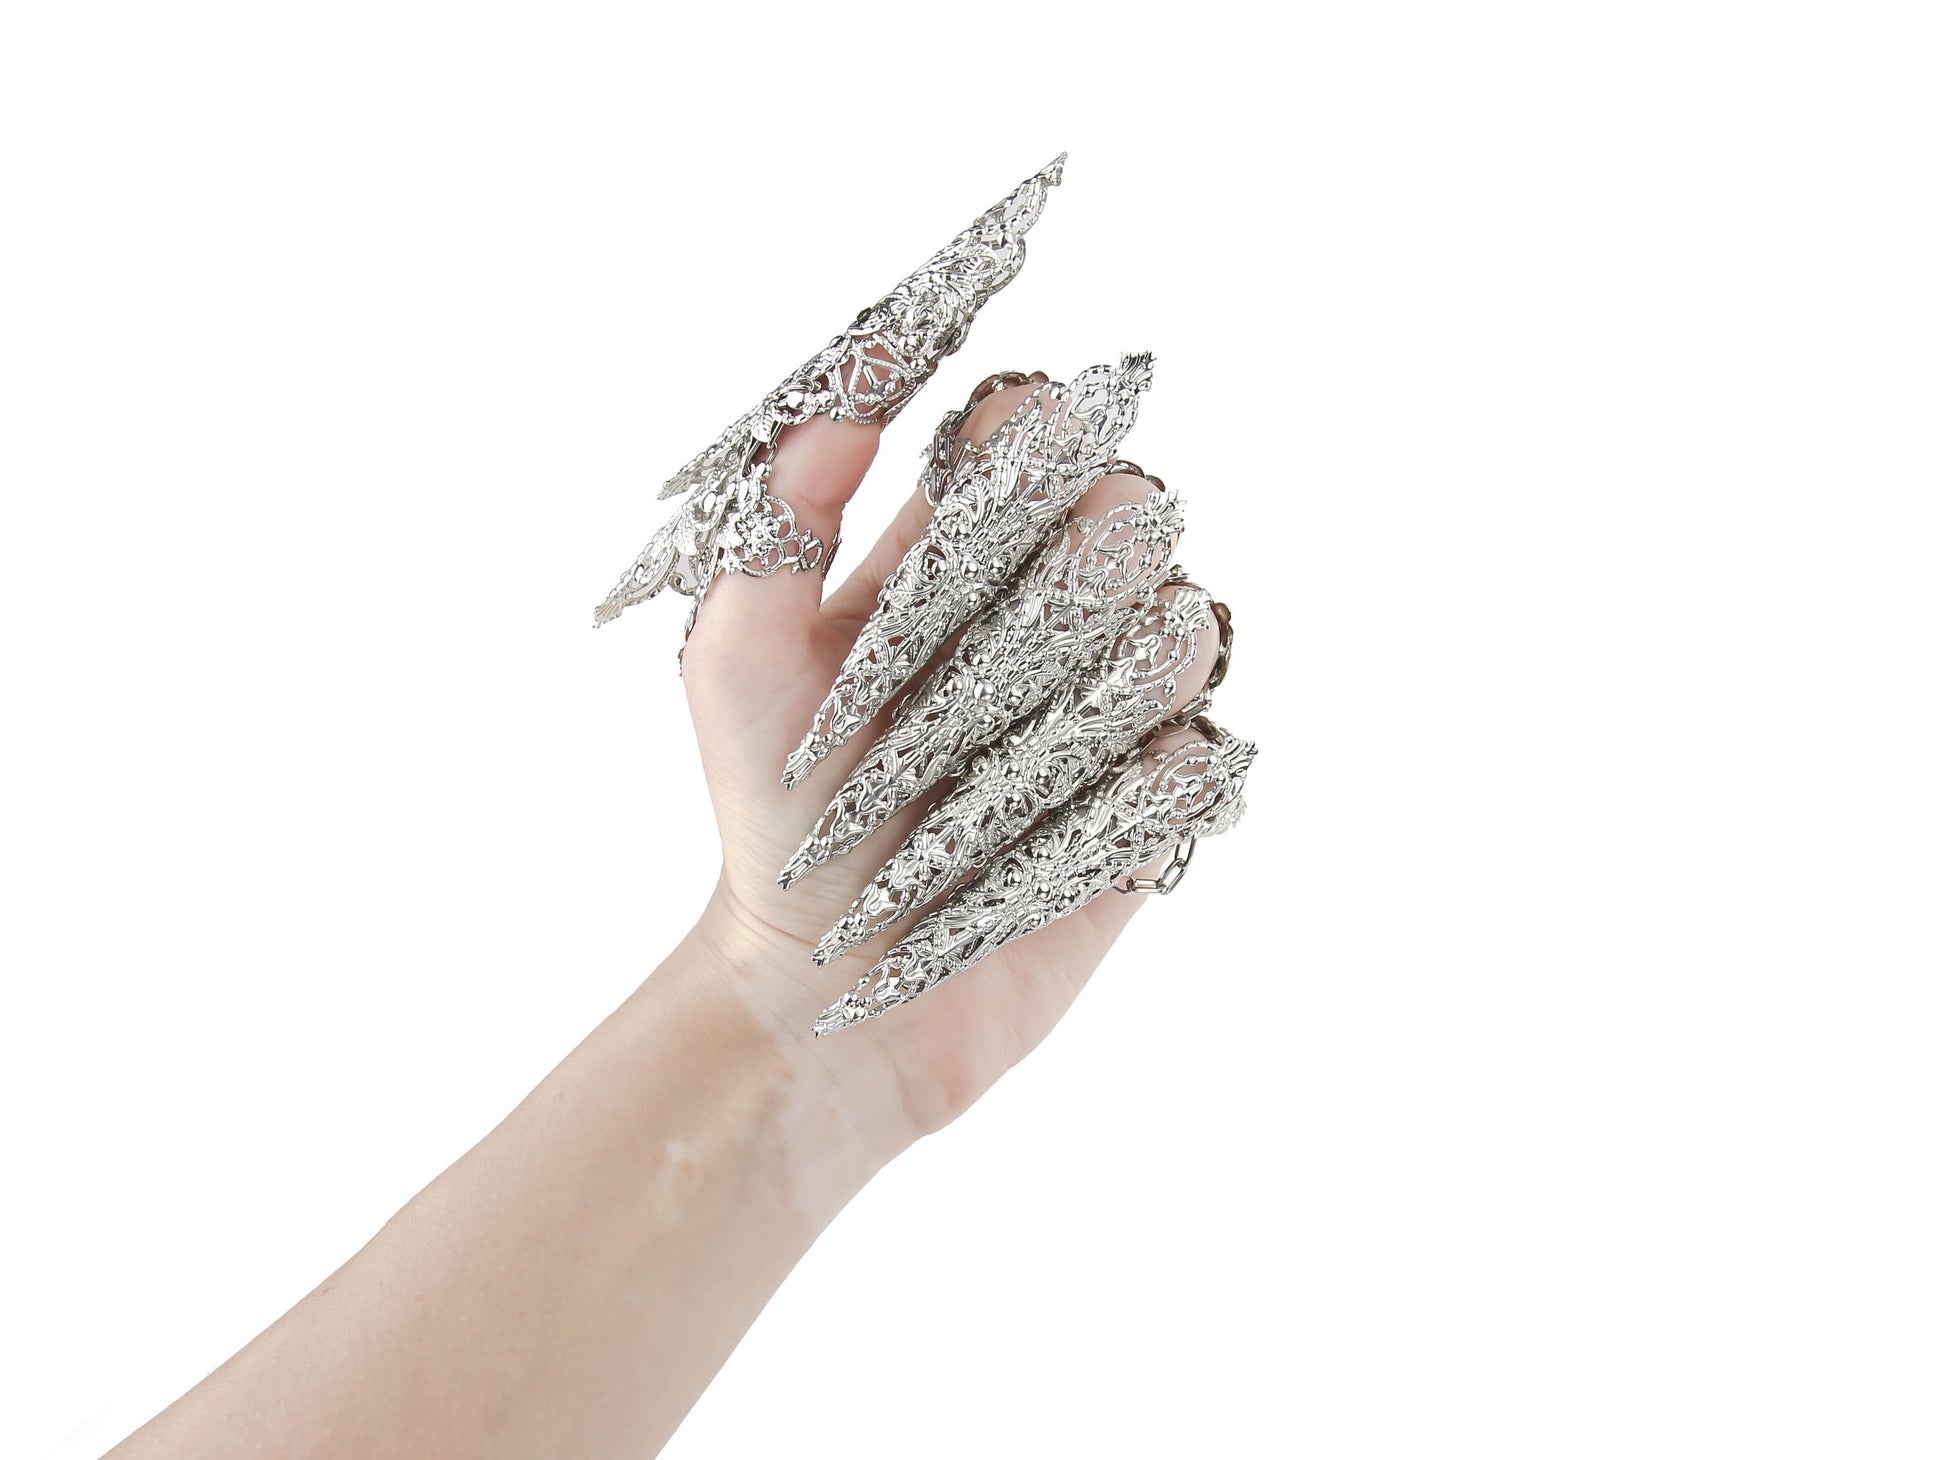 An alluring hand showcasing Myril Jewels' dragon-like claw rings set, with elaborate silver detailing perfect for gothic and alternative fashion enthusiasts. This neo-goth masterpiece is ideal for Halloween, a rave, or as an eye-catching everyday accessory for those who dare to stand out.